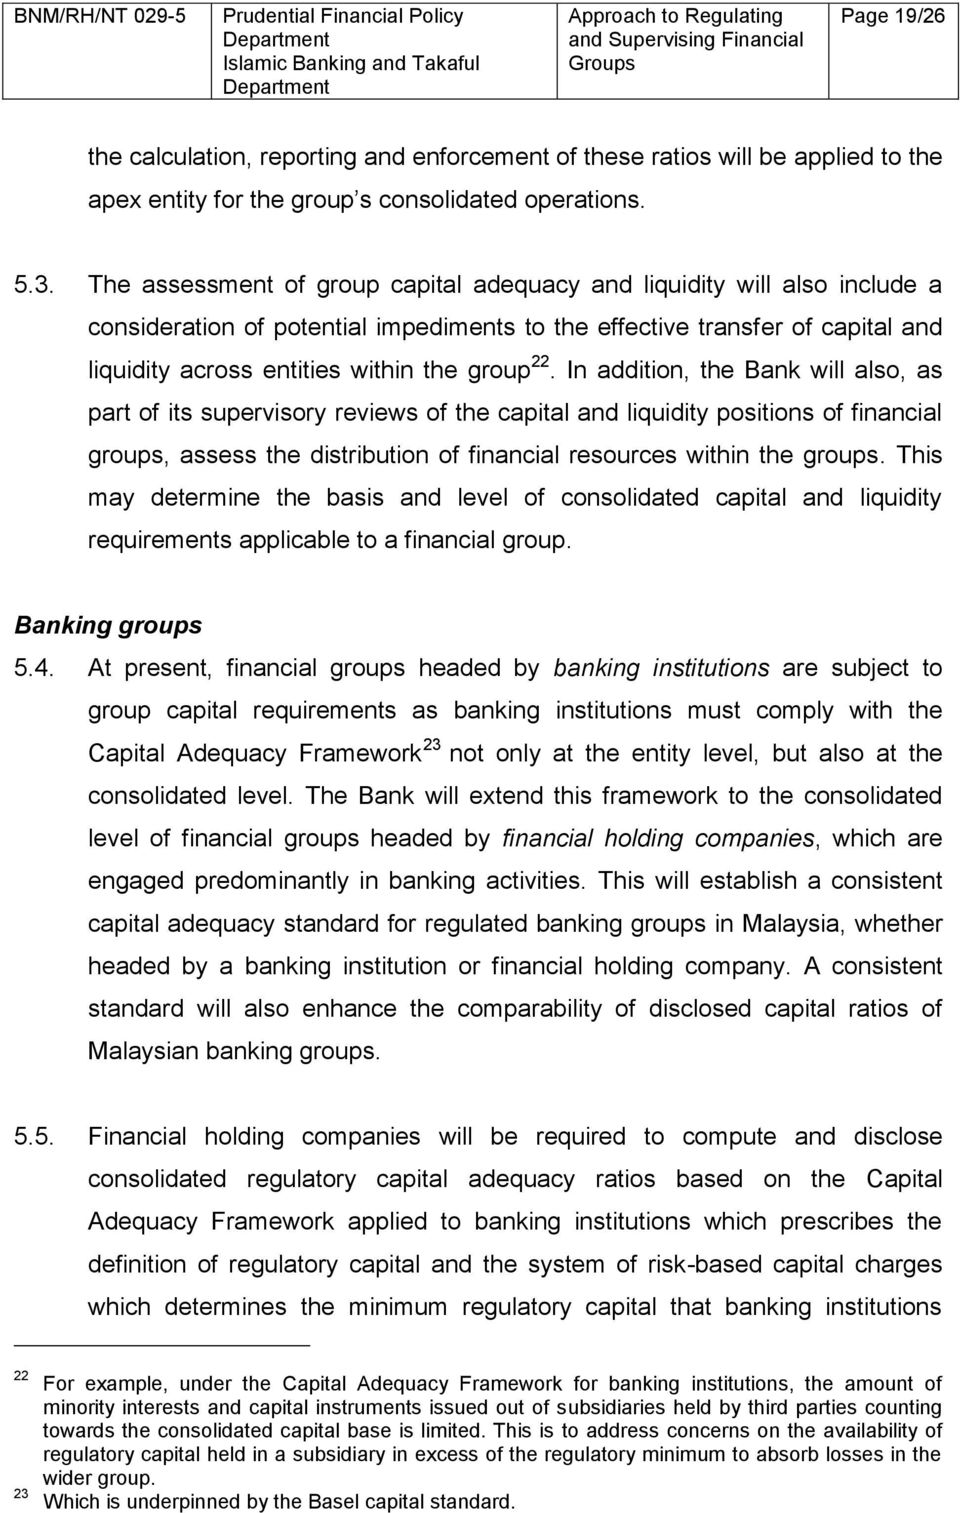 22. In addition, the Bank will also, as part of its supervisory reviews of the capital and liquidity positions of financial groups, assess the distribution of financial resources within the groups.